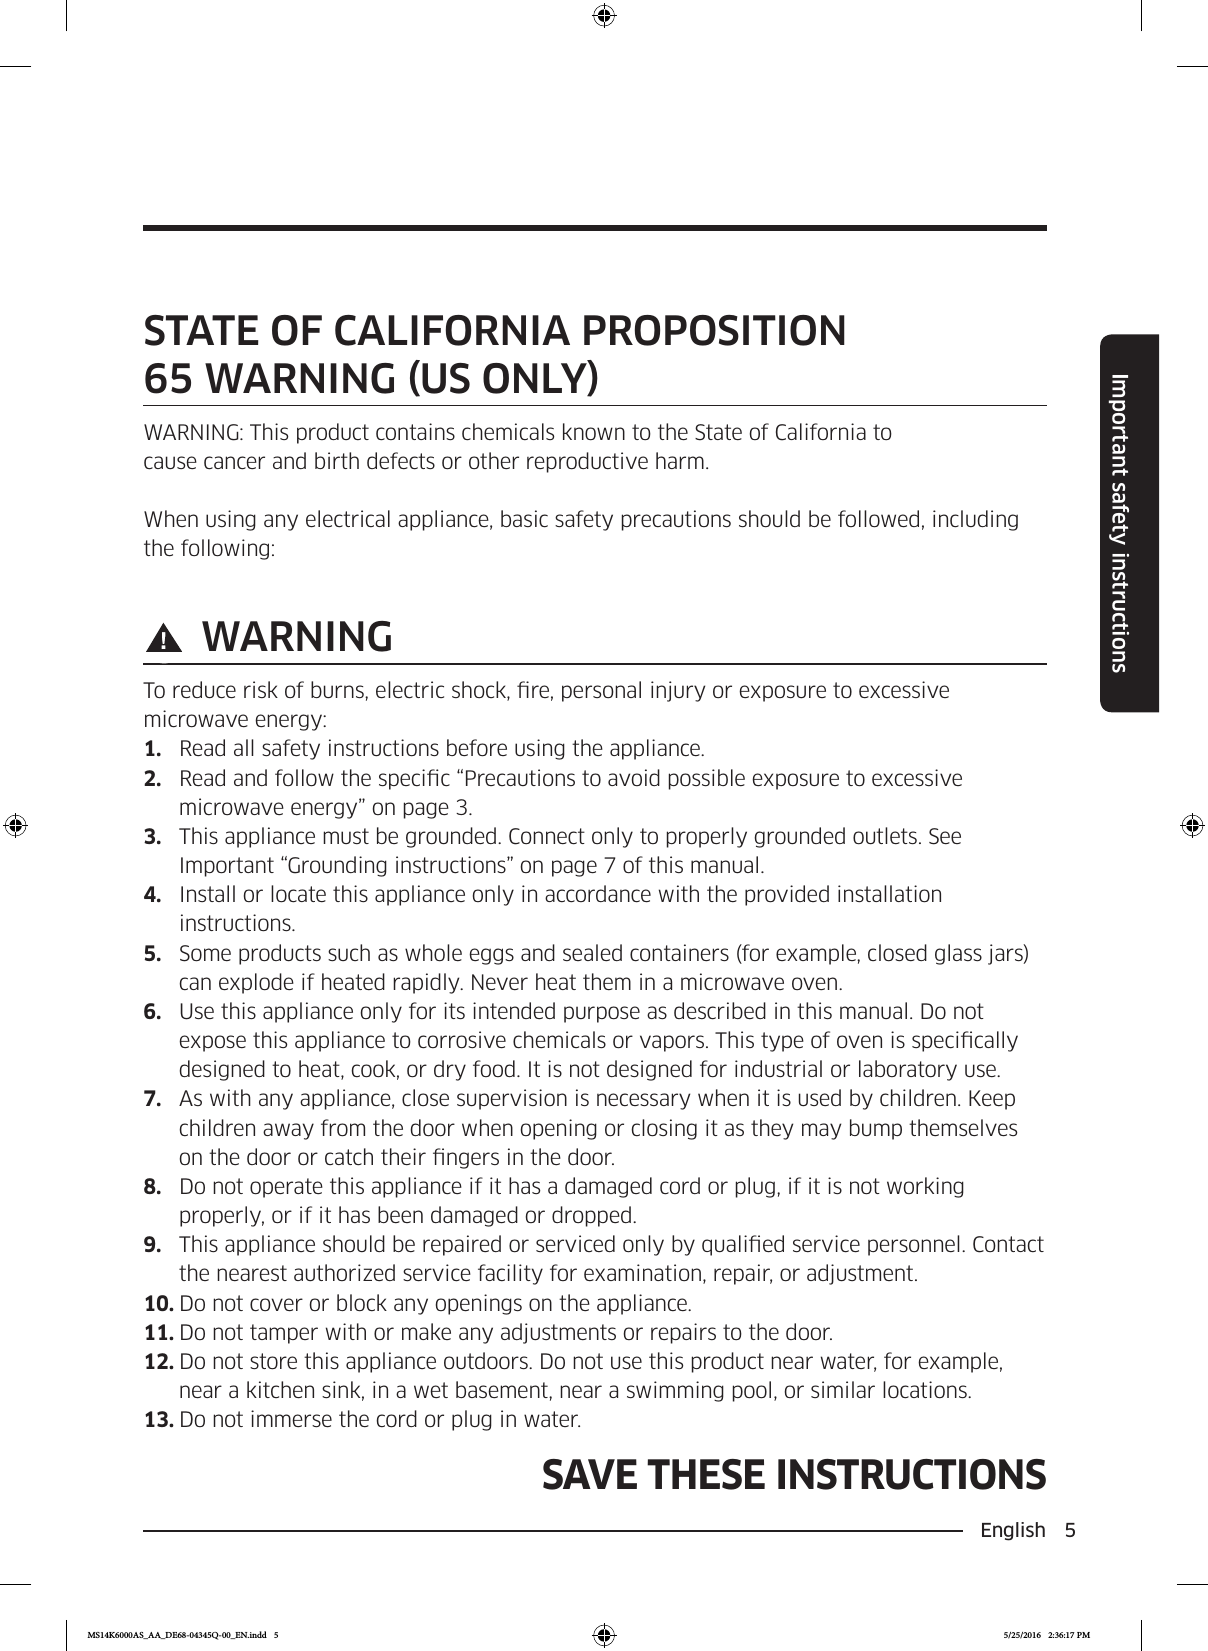 English  5Important safety instructionsSAVE THESE INSTRUCTIONSSAVE THESE INSTRUCTIONSSTATE OF CALIFORNIA PROPOSITION  65 WARNING US ONLYWARNING: This product contains chemicals known to the State of California tocause cancer and birth defects or other reproductive harm.When using any electrical appliance, basic safety precautions should be followed, including the following: WARNINGTo reduce risk of burns, electric shock, re, personal injury or exposure to excessive microwave energy:1.  Read all safety instructions before using the appliance.2.  Read and follow the specic “Precautions to avoid possible exposure to excessive microwave energy” on page 3.3.  This appliance must be grounded. Connect only to properly grounded outlets. See Important “Grounding instructions” on page 7 of this manual.4.  Install or locate this appliance only in accordance with the provided installation instructions.5.  Some products such as whole eggs and sealed containers (for example, closed glass jars) can explode if heated rapidly. Never heat them in a microwave oven.6.  Use this appliance only for its intended purpose as described in this manual. Do not expose this appliance to corrosive chemicals or vapors. This type of oven is specically designed to heat, cook, or dry food. It is not designed for industrial or laboratory use.7.  As with any appliance, close supervision is necessary when it is used by children. Keep children away from the door when opening or closing it as they may bump themselves on the door or catch their ngers in the door.8.  Do not operate this appliance if it has a damaged cord or plug, if it is not working properly, or if it has been damaged or dropped.9.  This appliance should be repaired or serviced only by qualied service personnel. Contact the nearest authorized service facility for examination, repair, or adjustment.10. Do not cover or block any openings on the appliance.11. Do not tamper with or make any adjustments or repairs to the door.12. Do not store this appliance outdoors. Do not use this product near water, for example, near a kitchen sink, in a wet basement, near a swimming pool, or similar locations.13. Do not immerse the cord or plug in water.MS14K6000AS_AA_DE68-04345Q-00_EN.indd   5 5/25/2016   2:36:17 PM